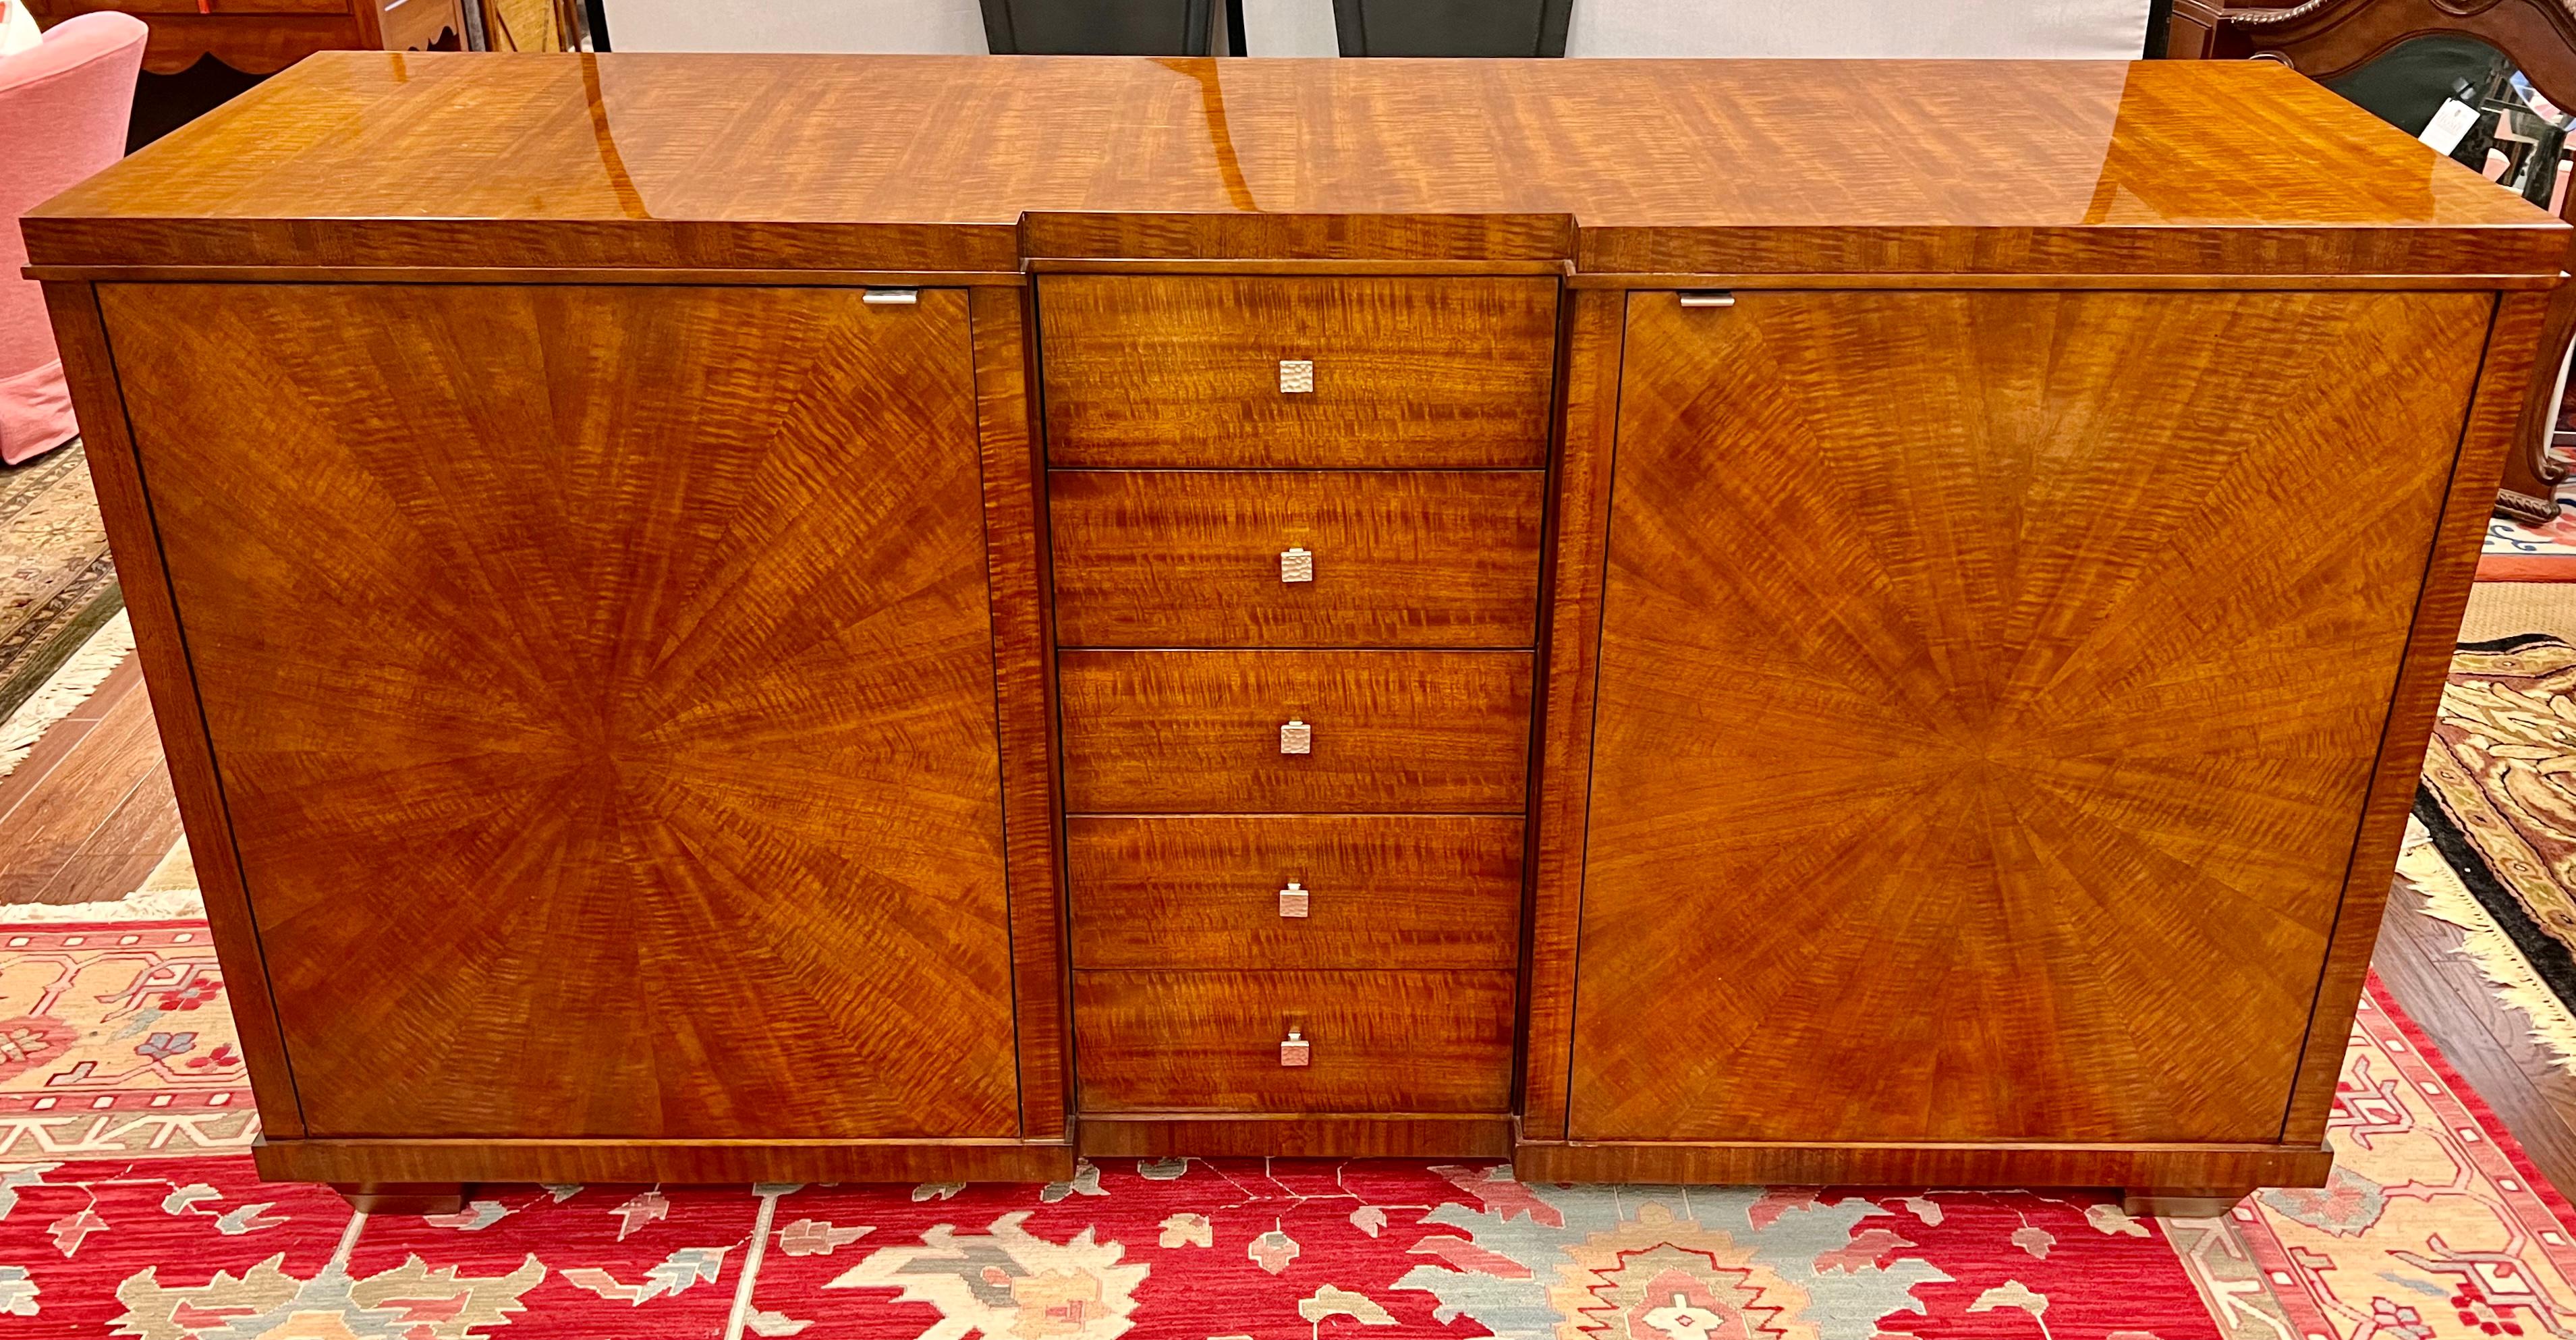 Stunning high-end Century Furniture sideboard credenza features an appealing sunburst design on the cabinet doors and a flame pattern to the top that add depth to the overall design. It comes with two door cabinets that offer ample storage space